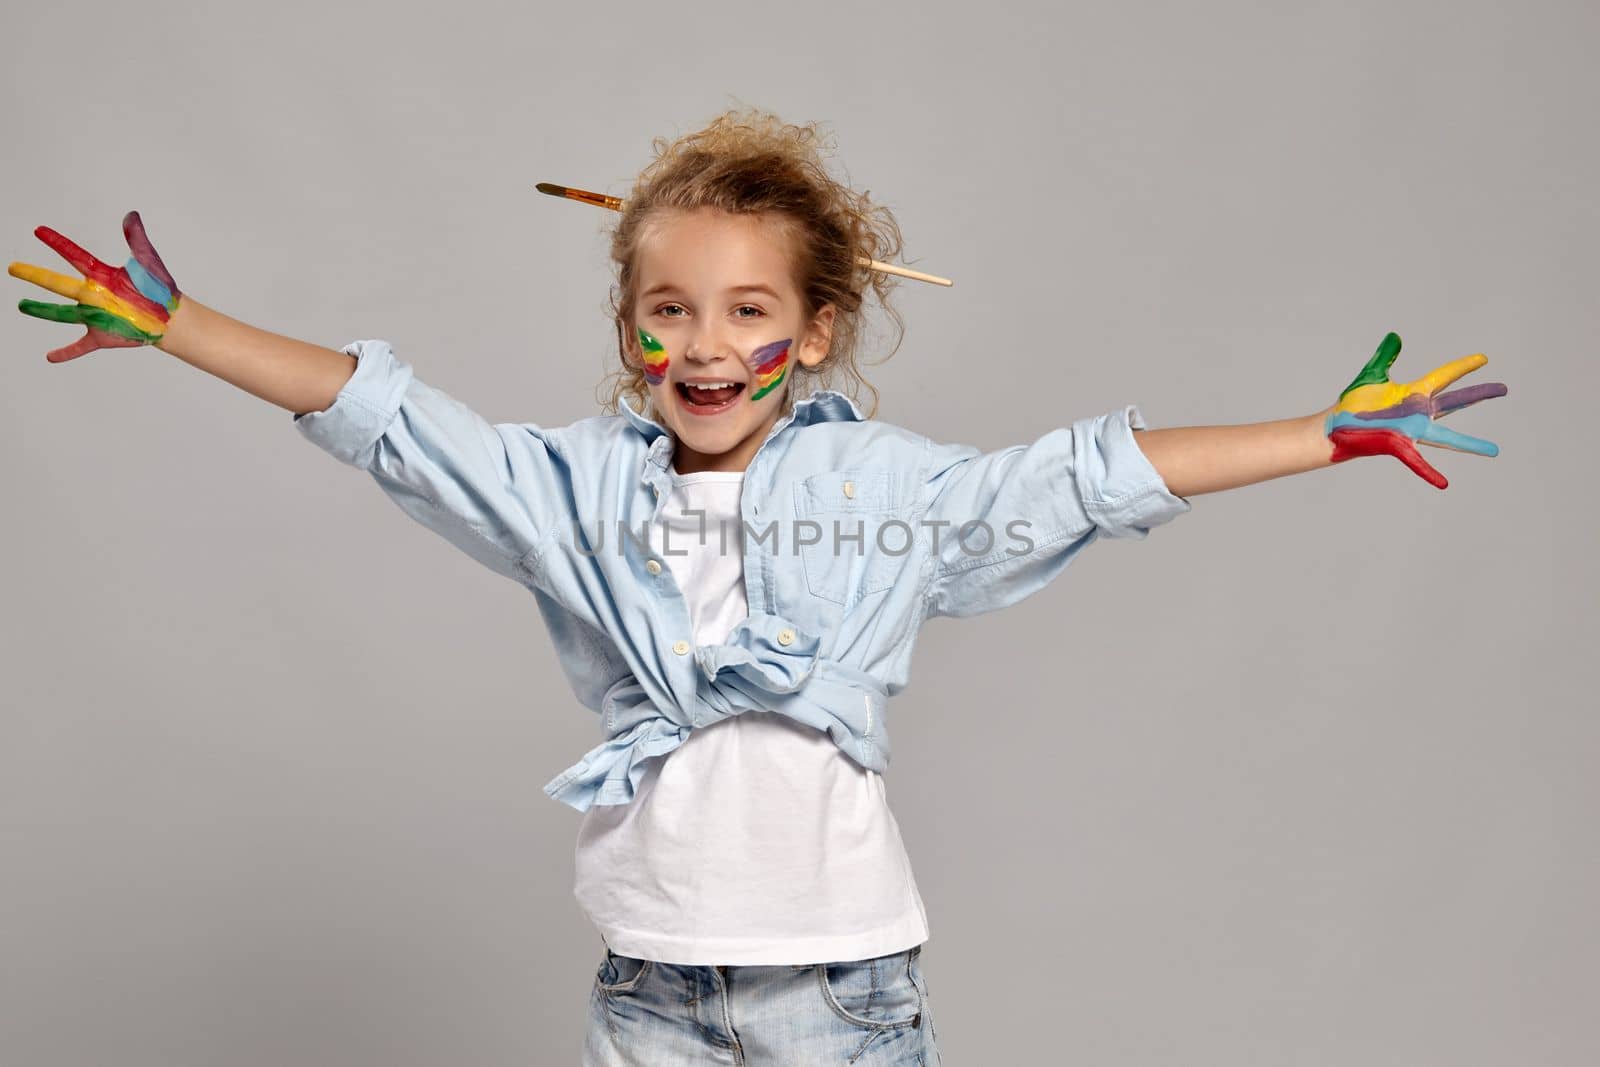 Beautiful little child having a brush in her chic hairstyle, wearing in a blue shirt and white t-shirt. She spread her arms widely and opened her mouth, looking at the camera on a gray background.